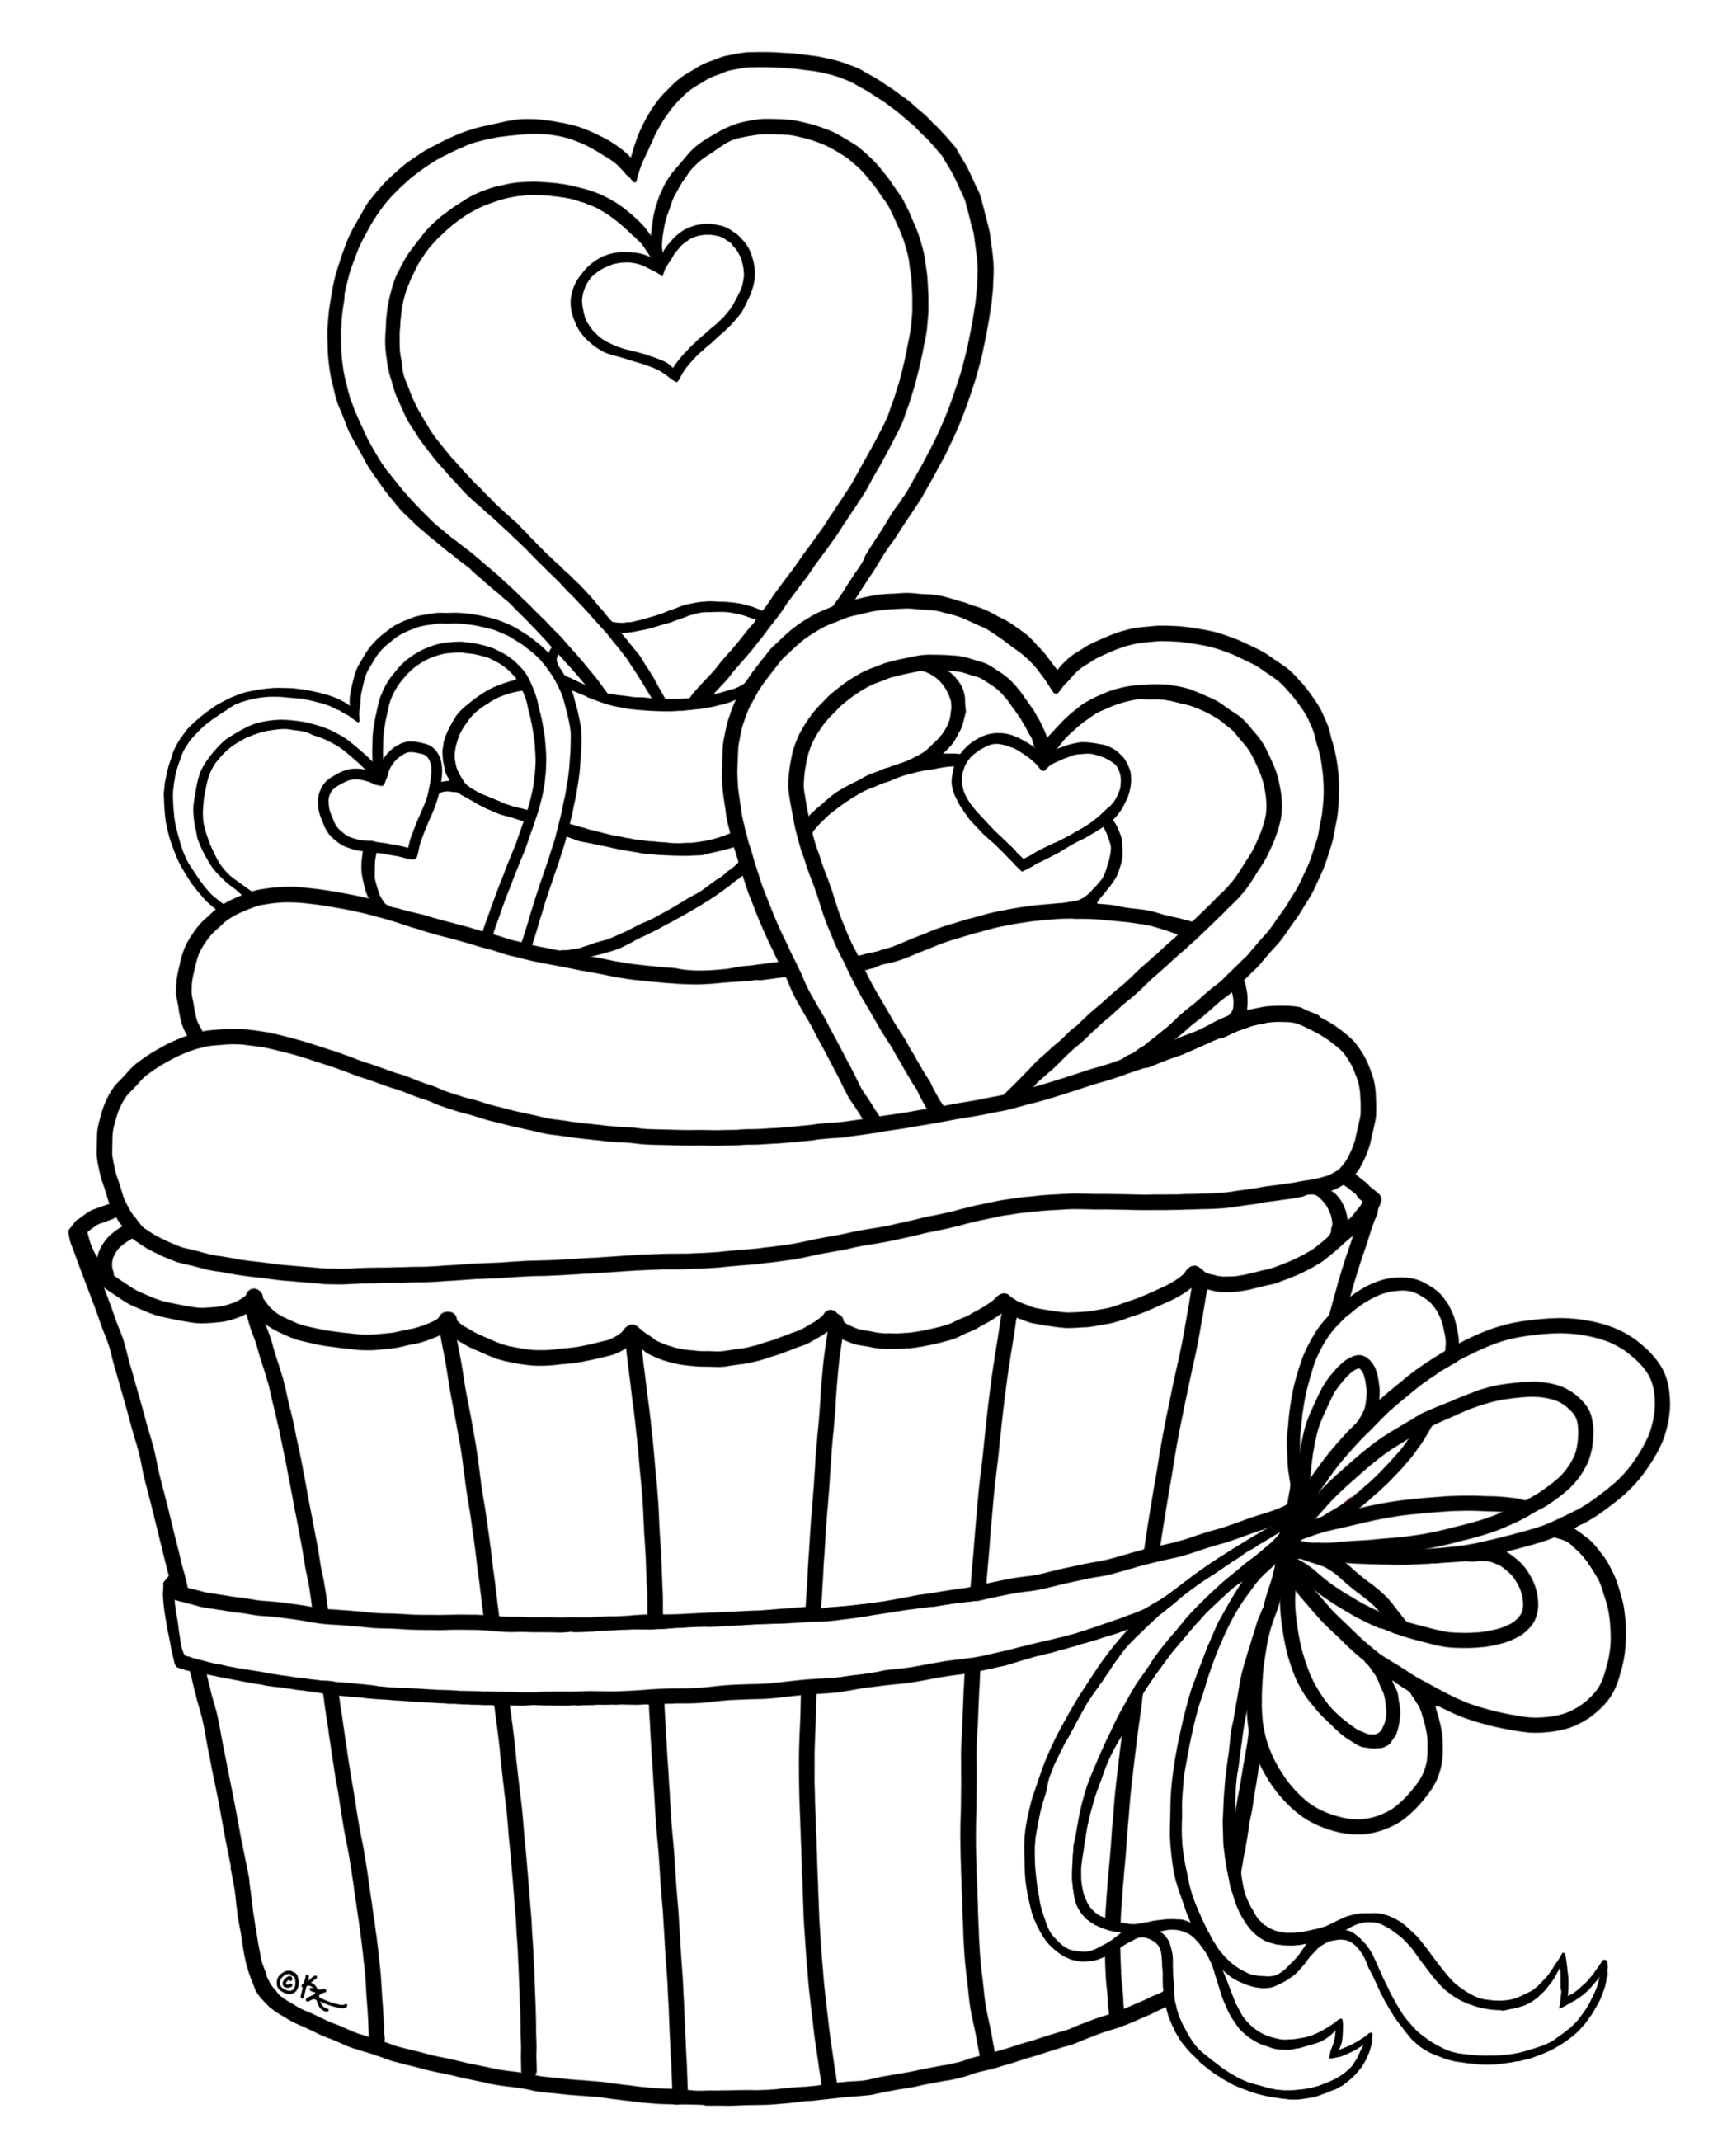 Black And White Cupcake Drawing Images & Pictures - Becuo ...